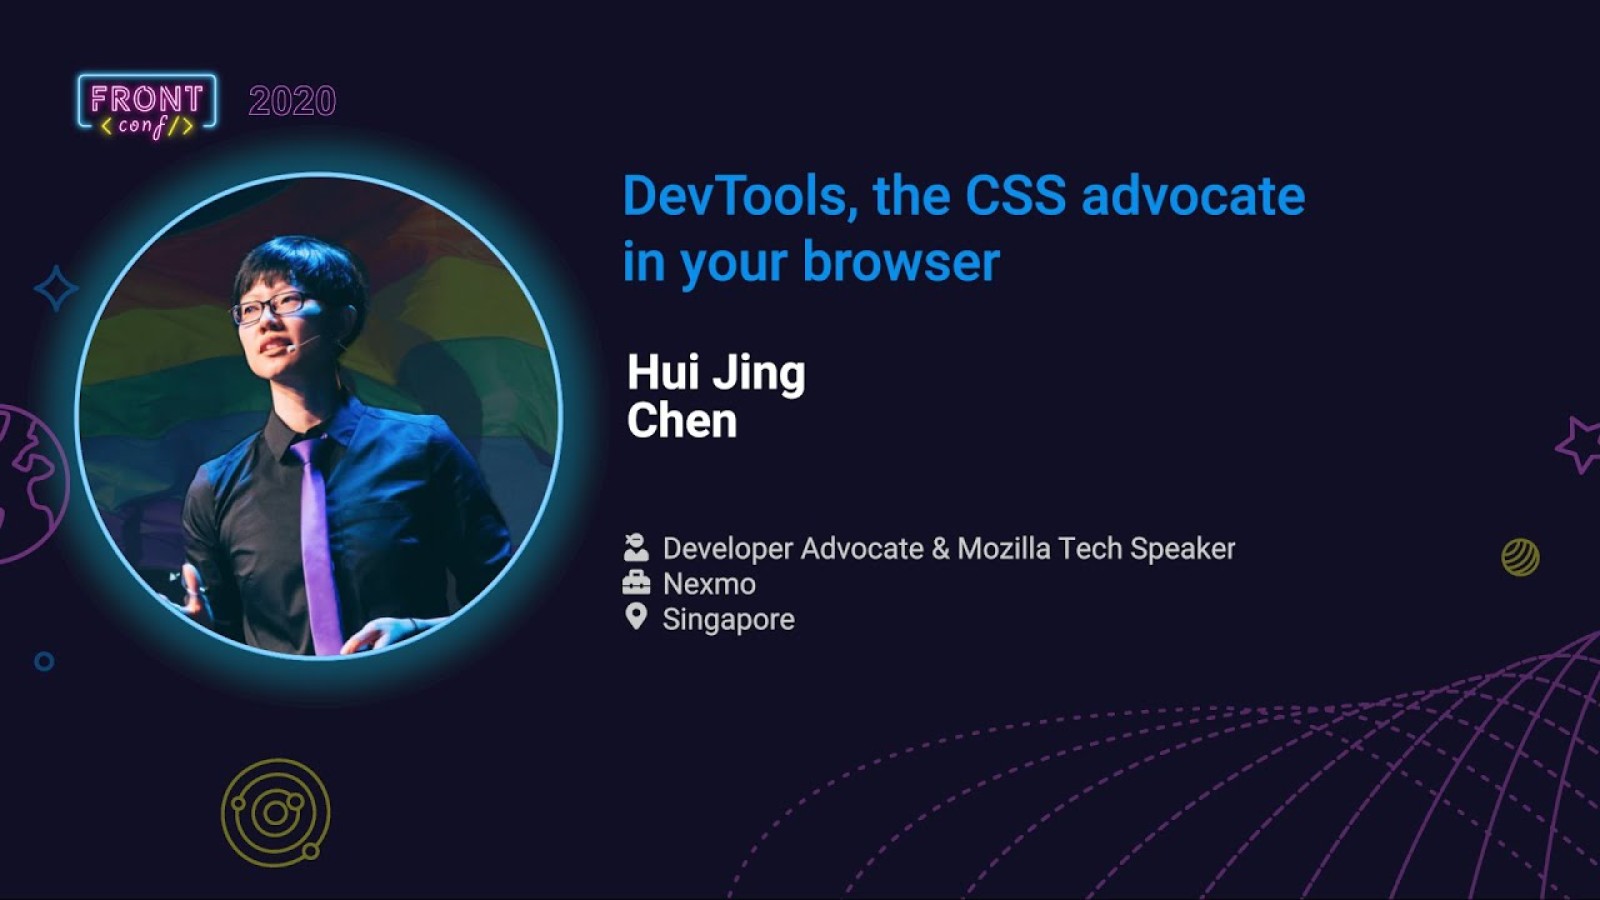 DevTools, the CSS advocate in your browser